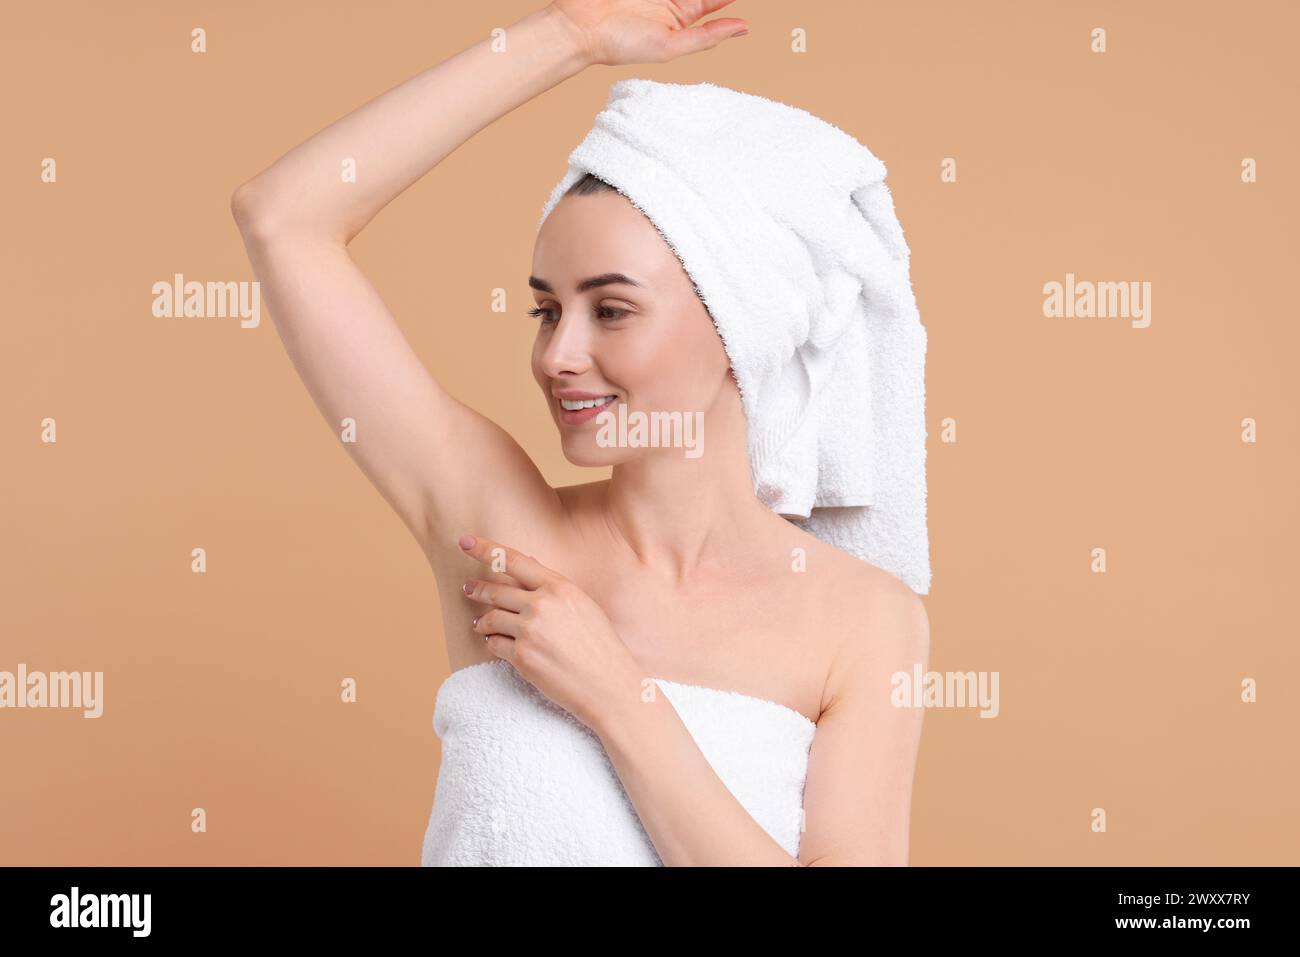 Beautiful woman showing armpit with smooth clean skin on beige background Stock Photo